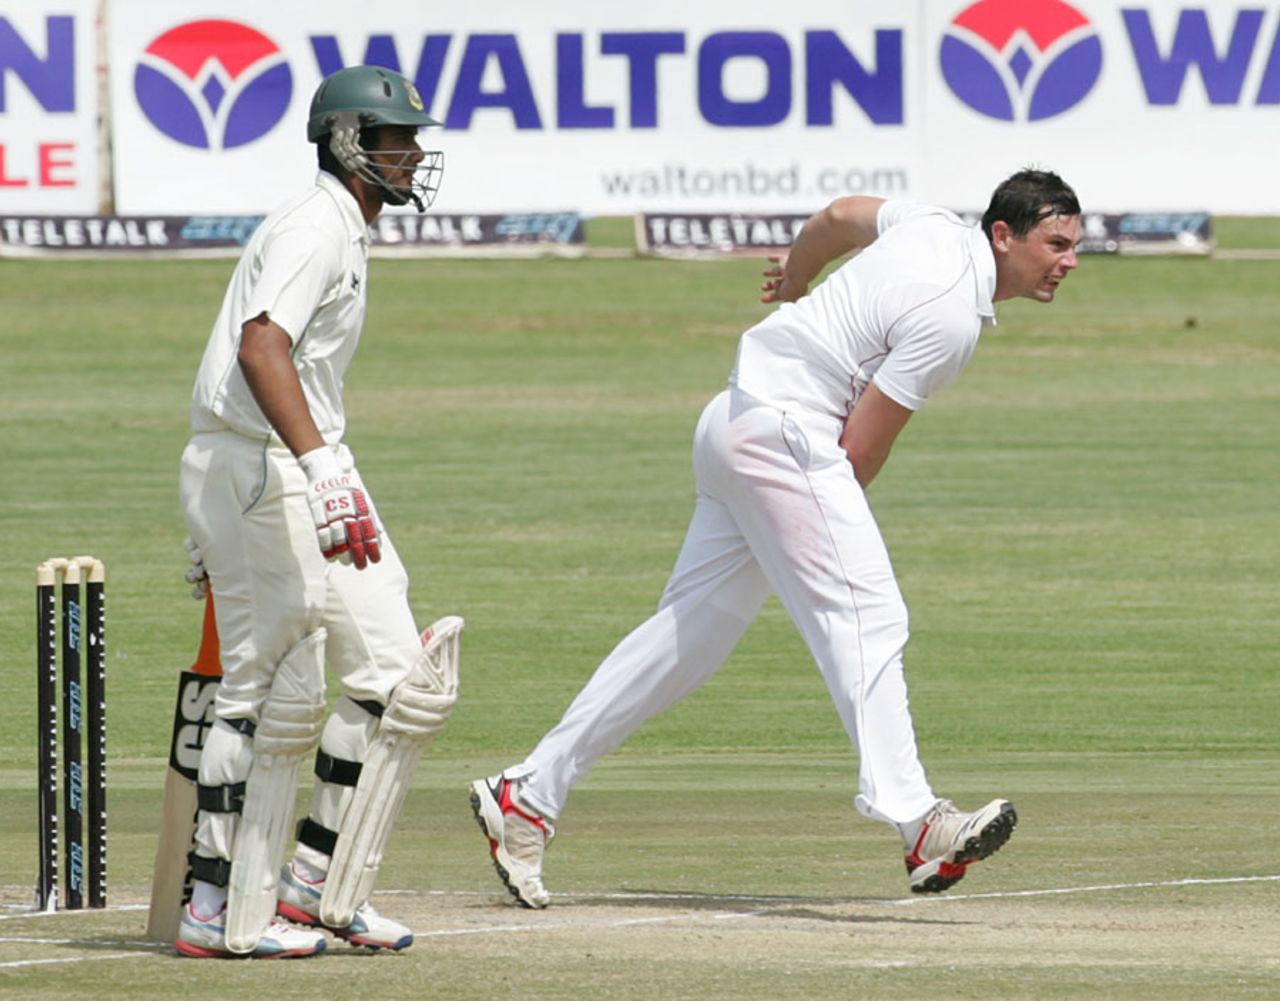 Keegan Meth picked up a couple of wickets, Zimbabwe v Bangladesh, 1st Test, Harare, 3rd day, April 19, 2013